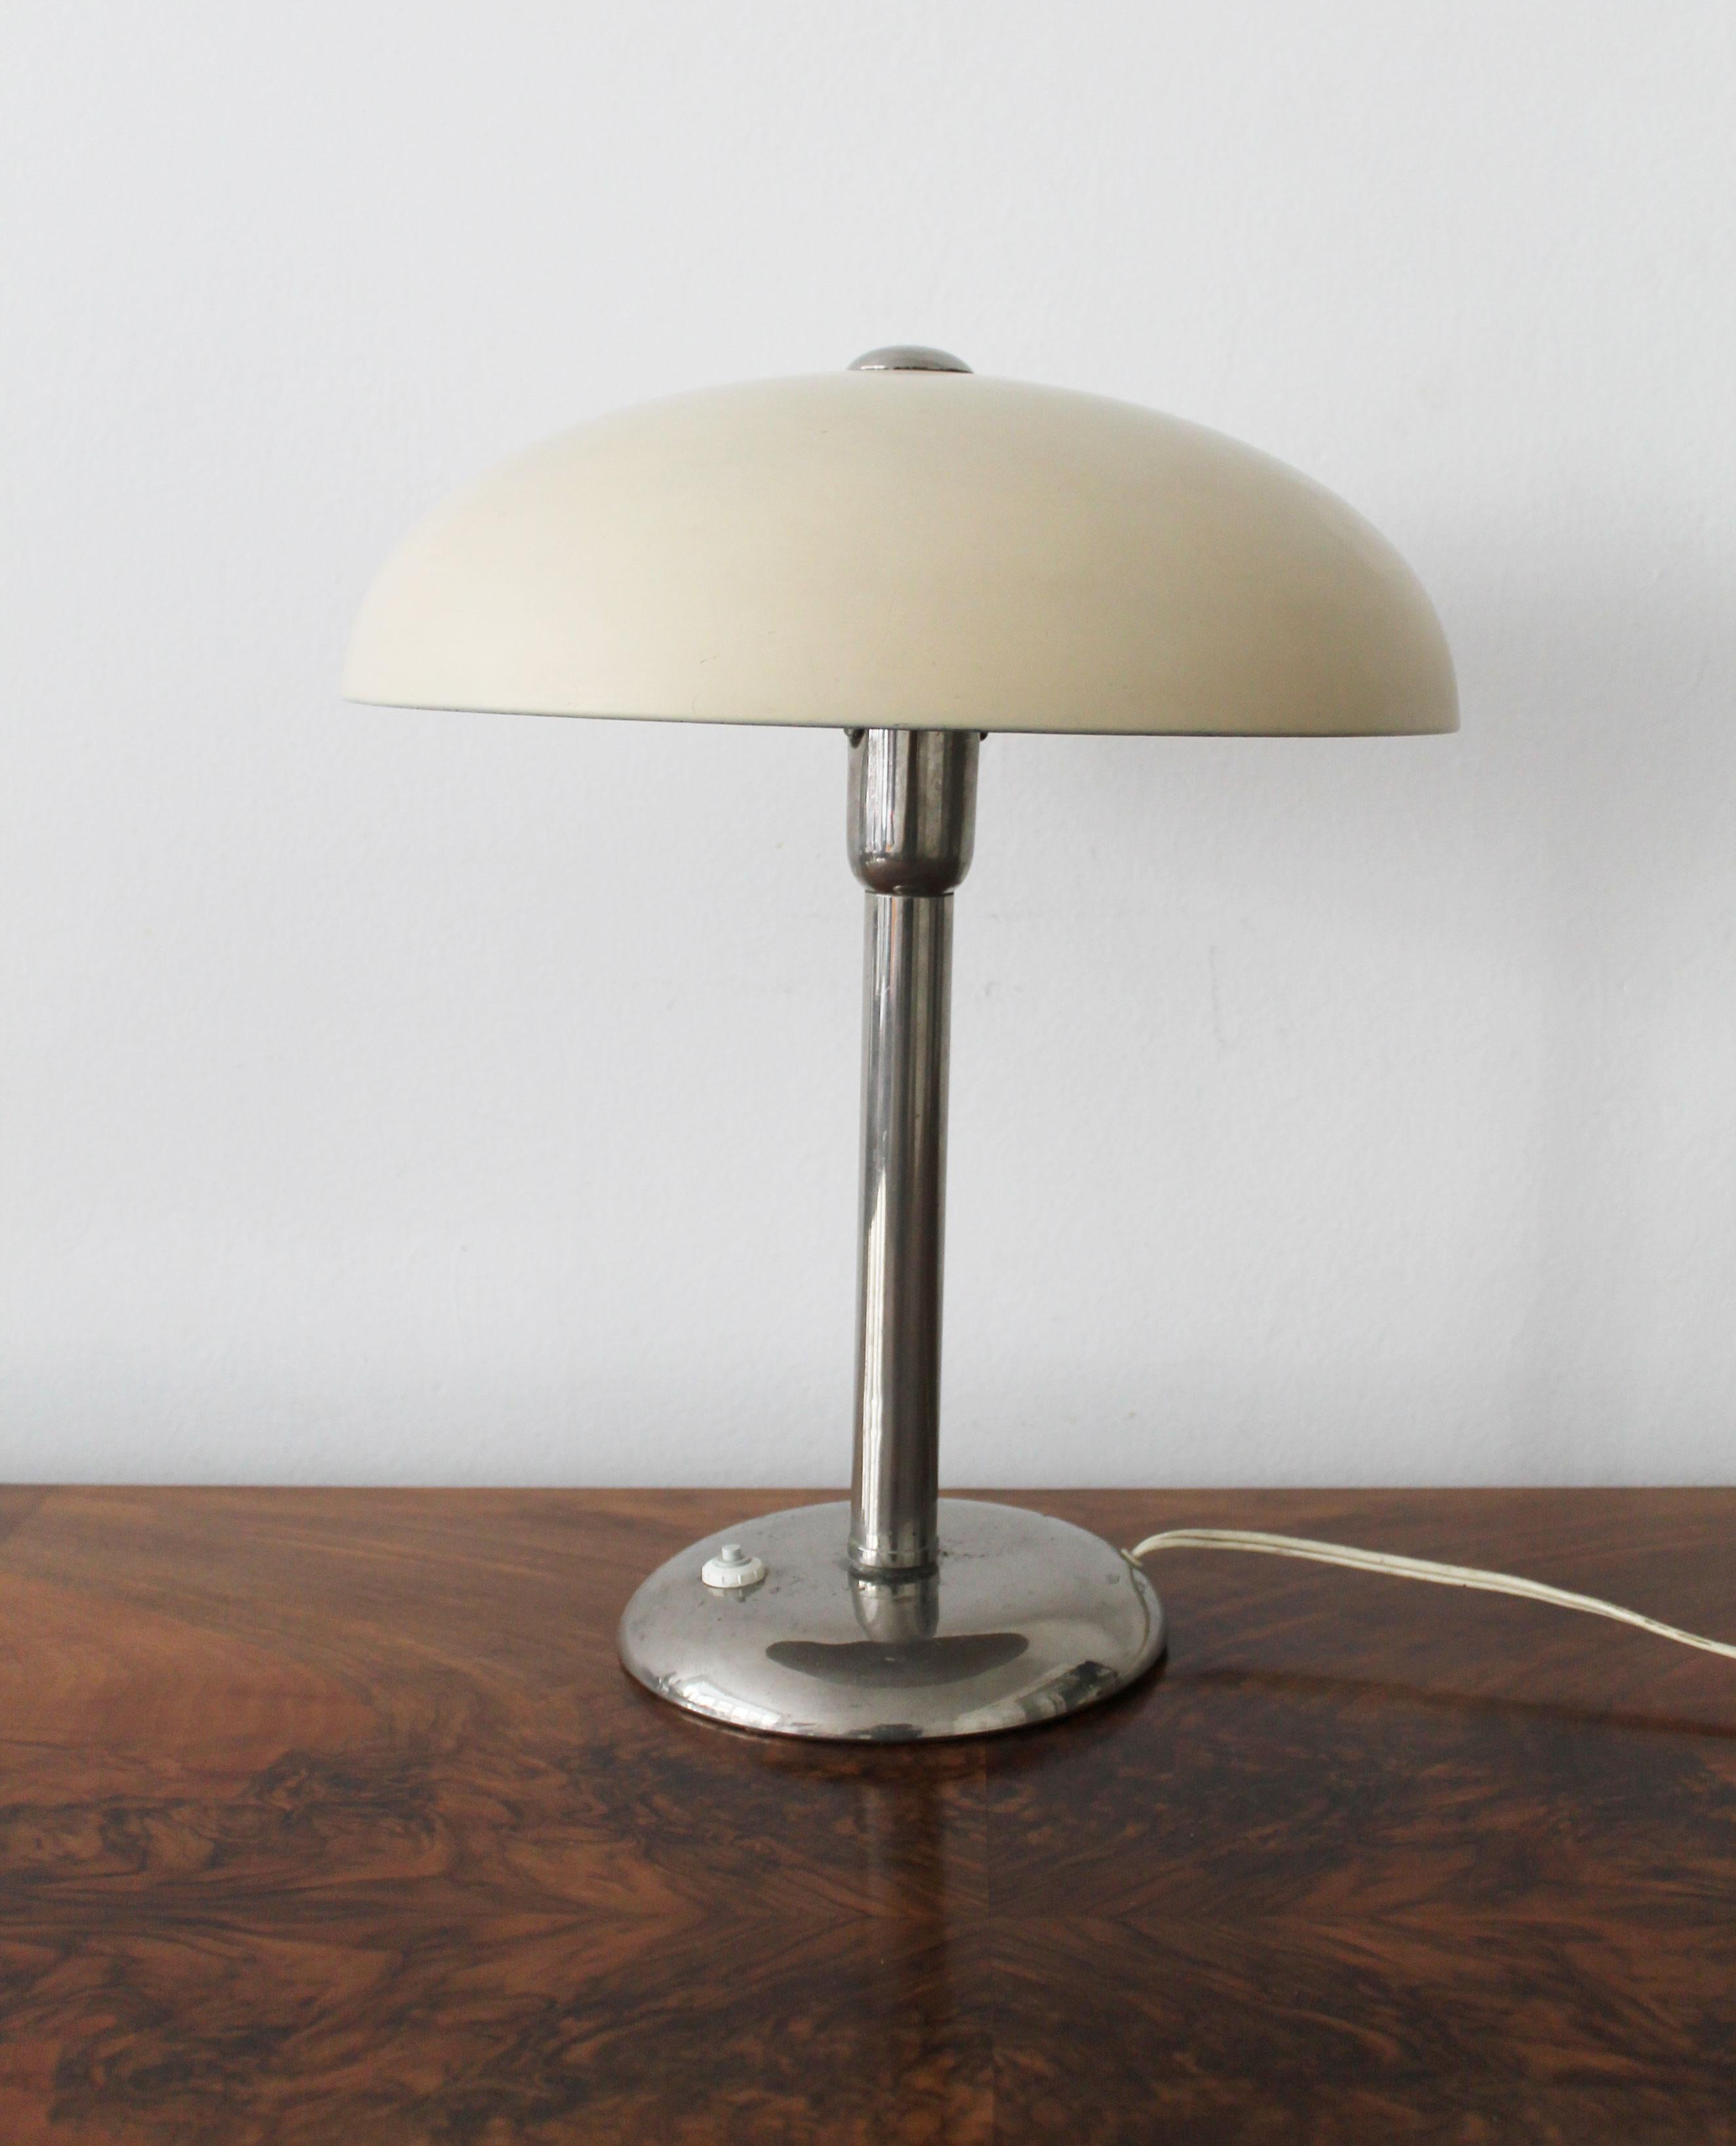 This 1930’s Modernist table lamp is made of chromed steel with a lampshade painted in a cream colour. The bulb is positioned vertically, right underneath the large shaped mushroom-like shade that is fixed to the base by a single flat screw on the